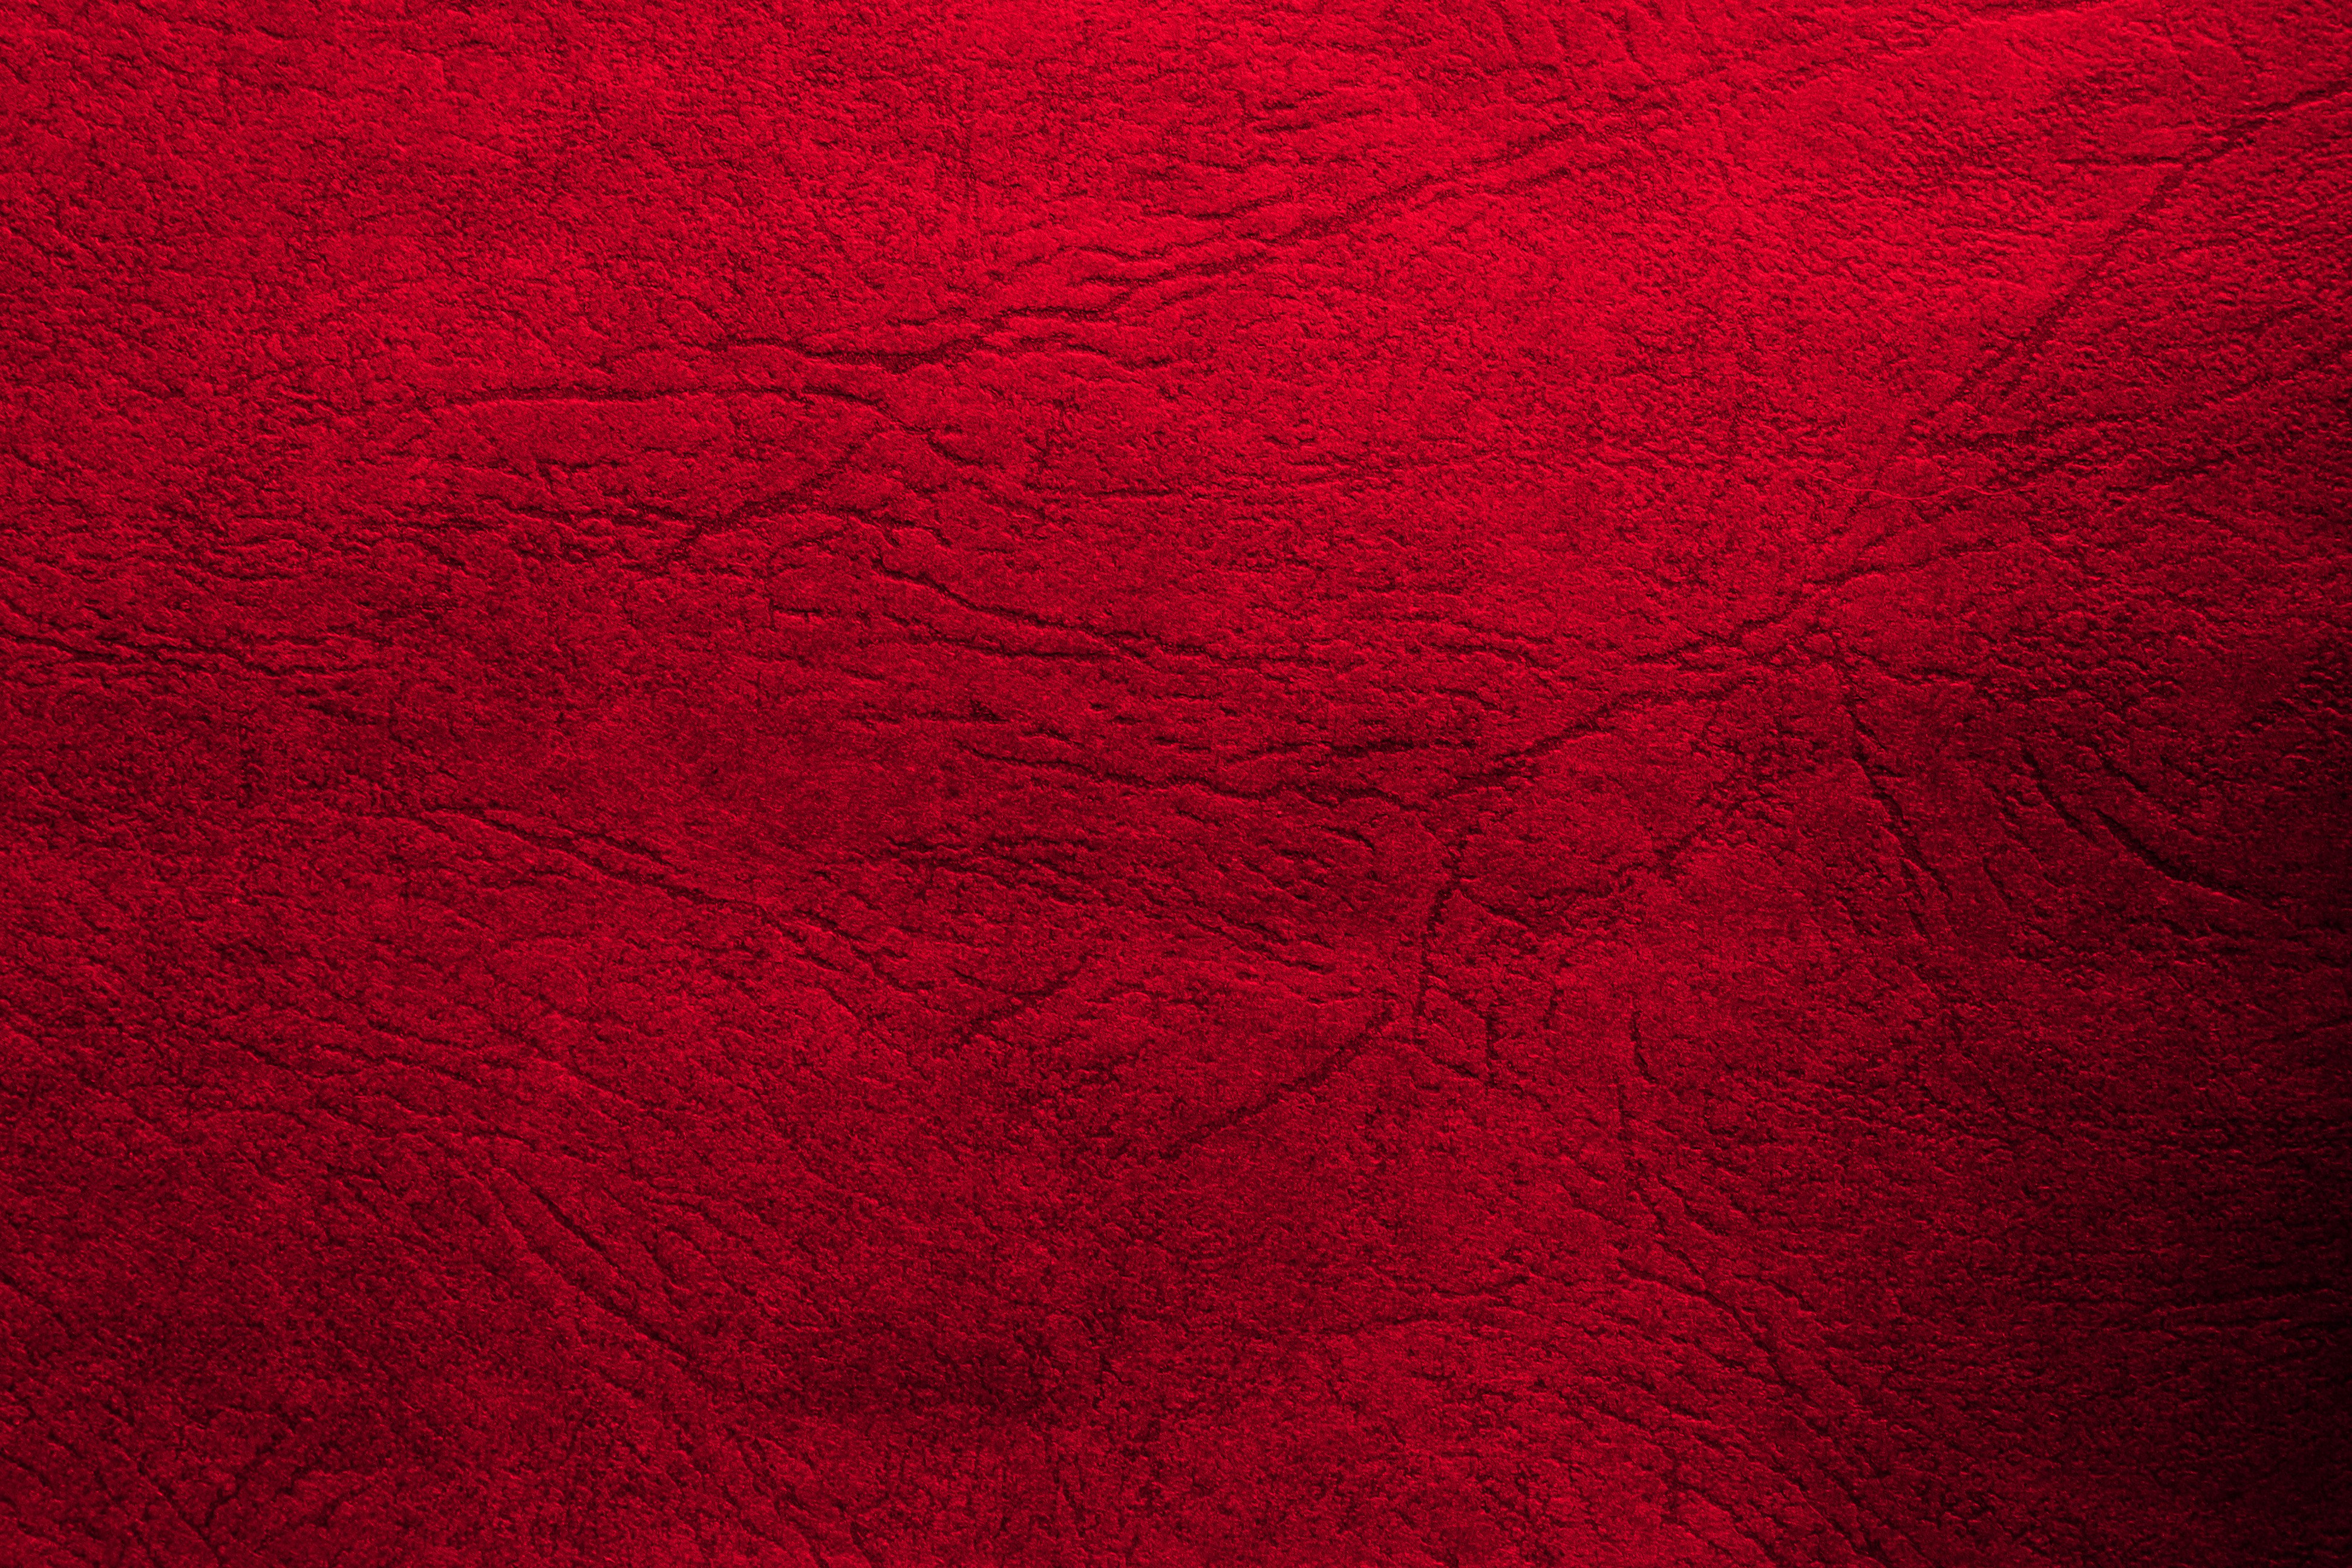 Red Leather Texture High Resolution Photo Dimensions